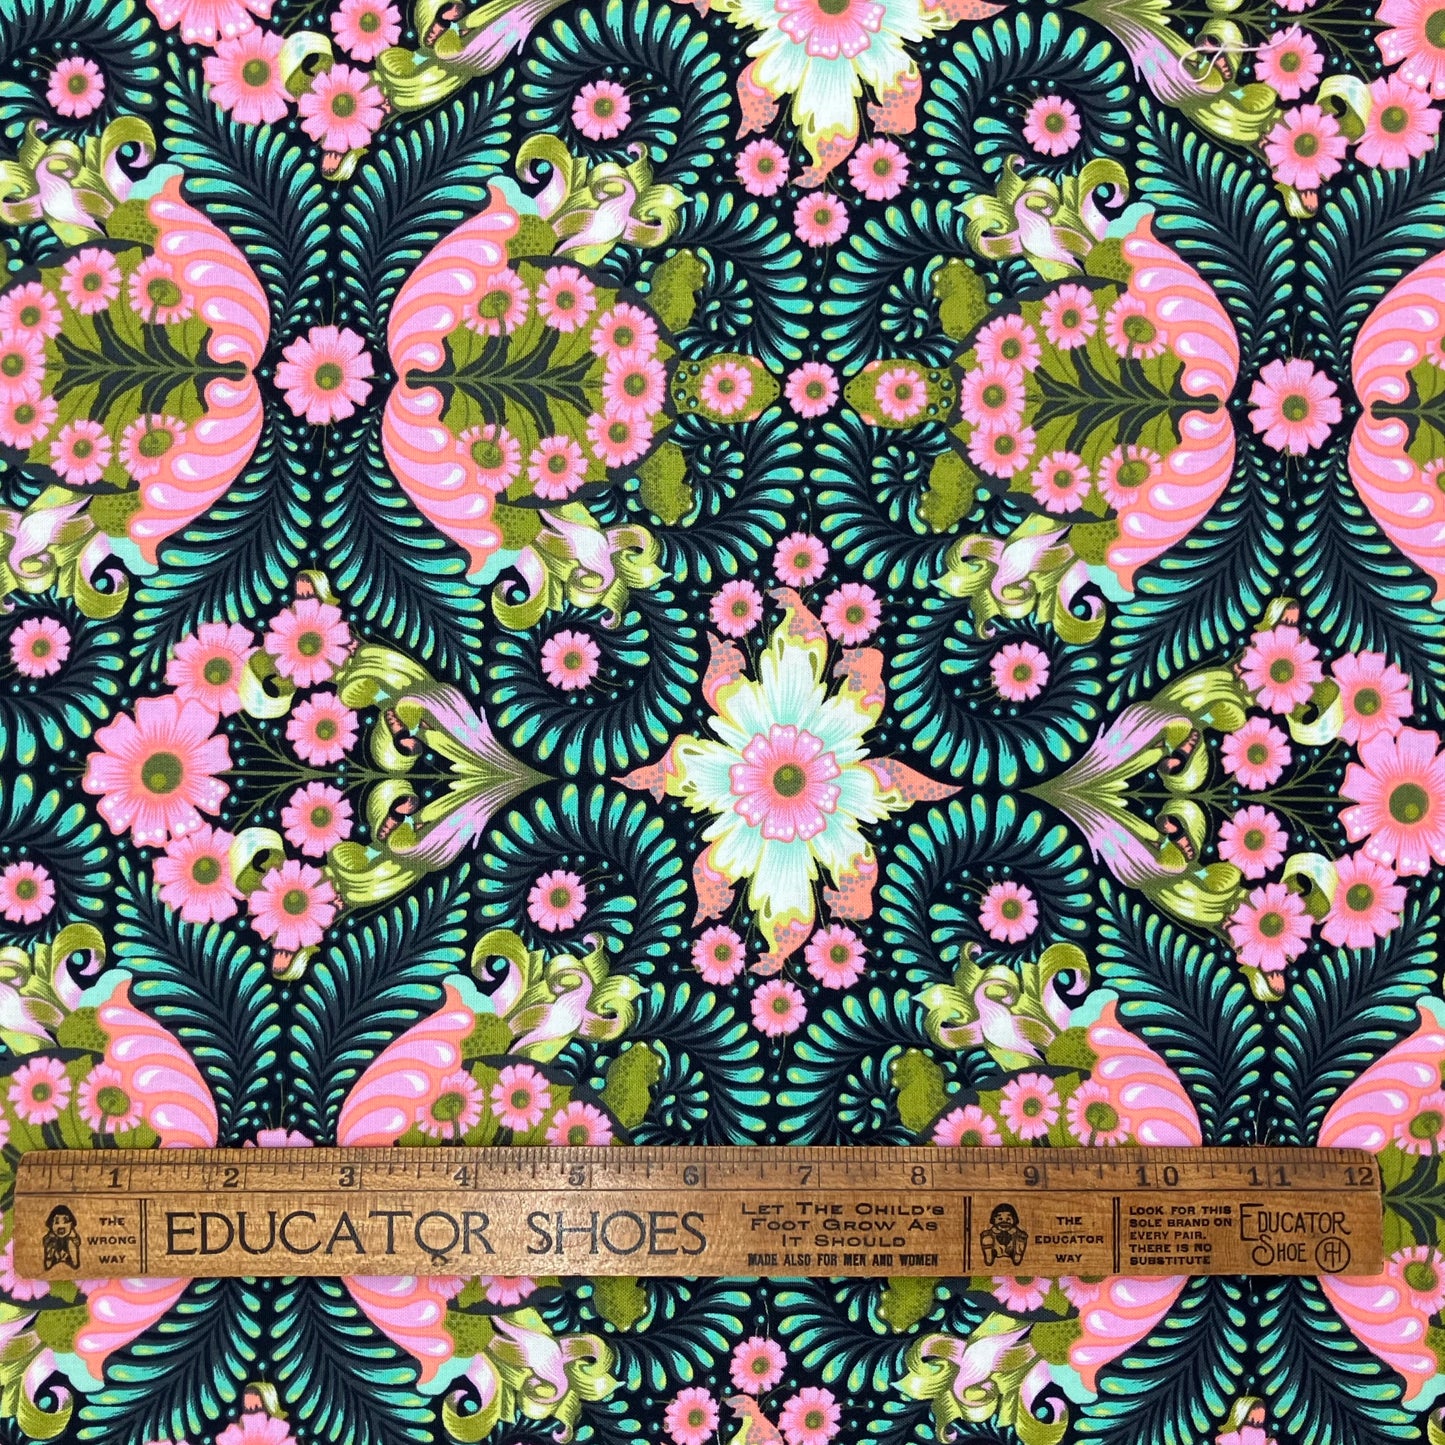 Quilting Cotton - Crazy Floral - 3/4 yard plus extra